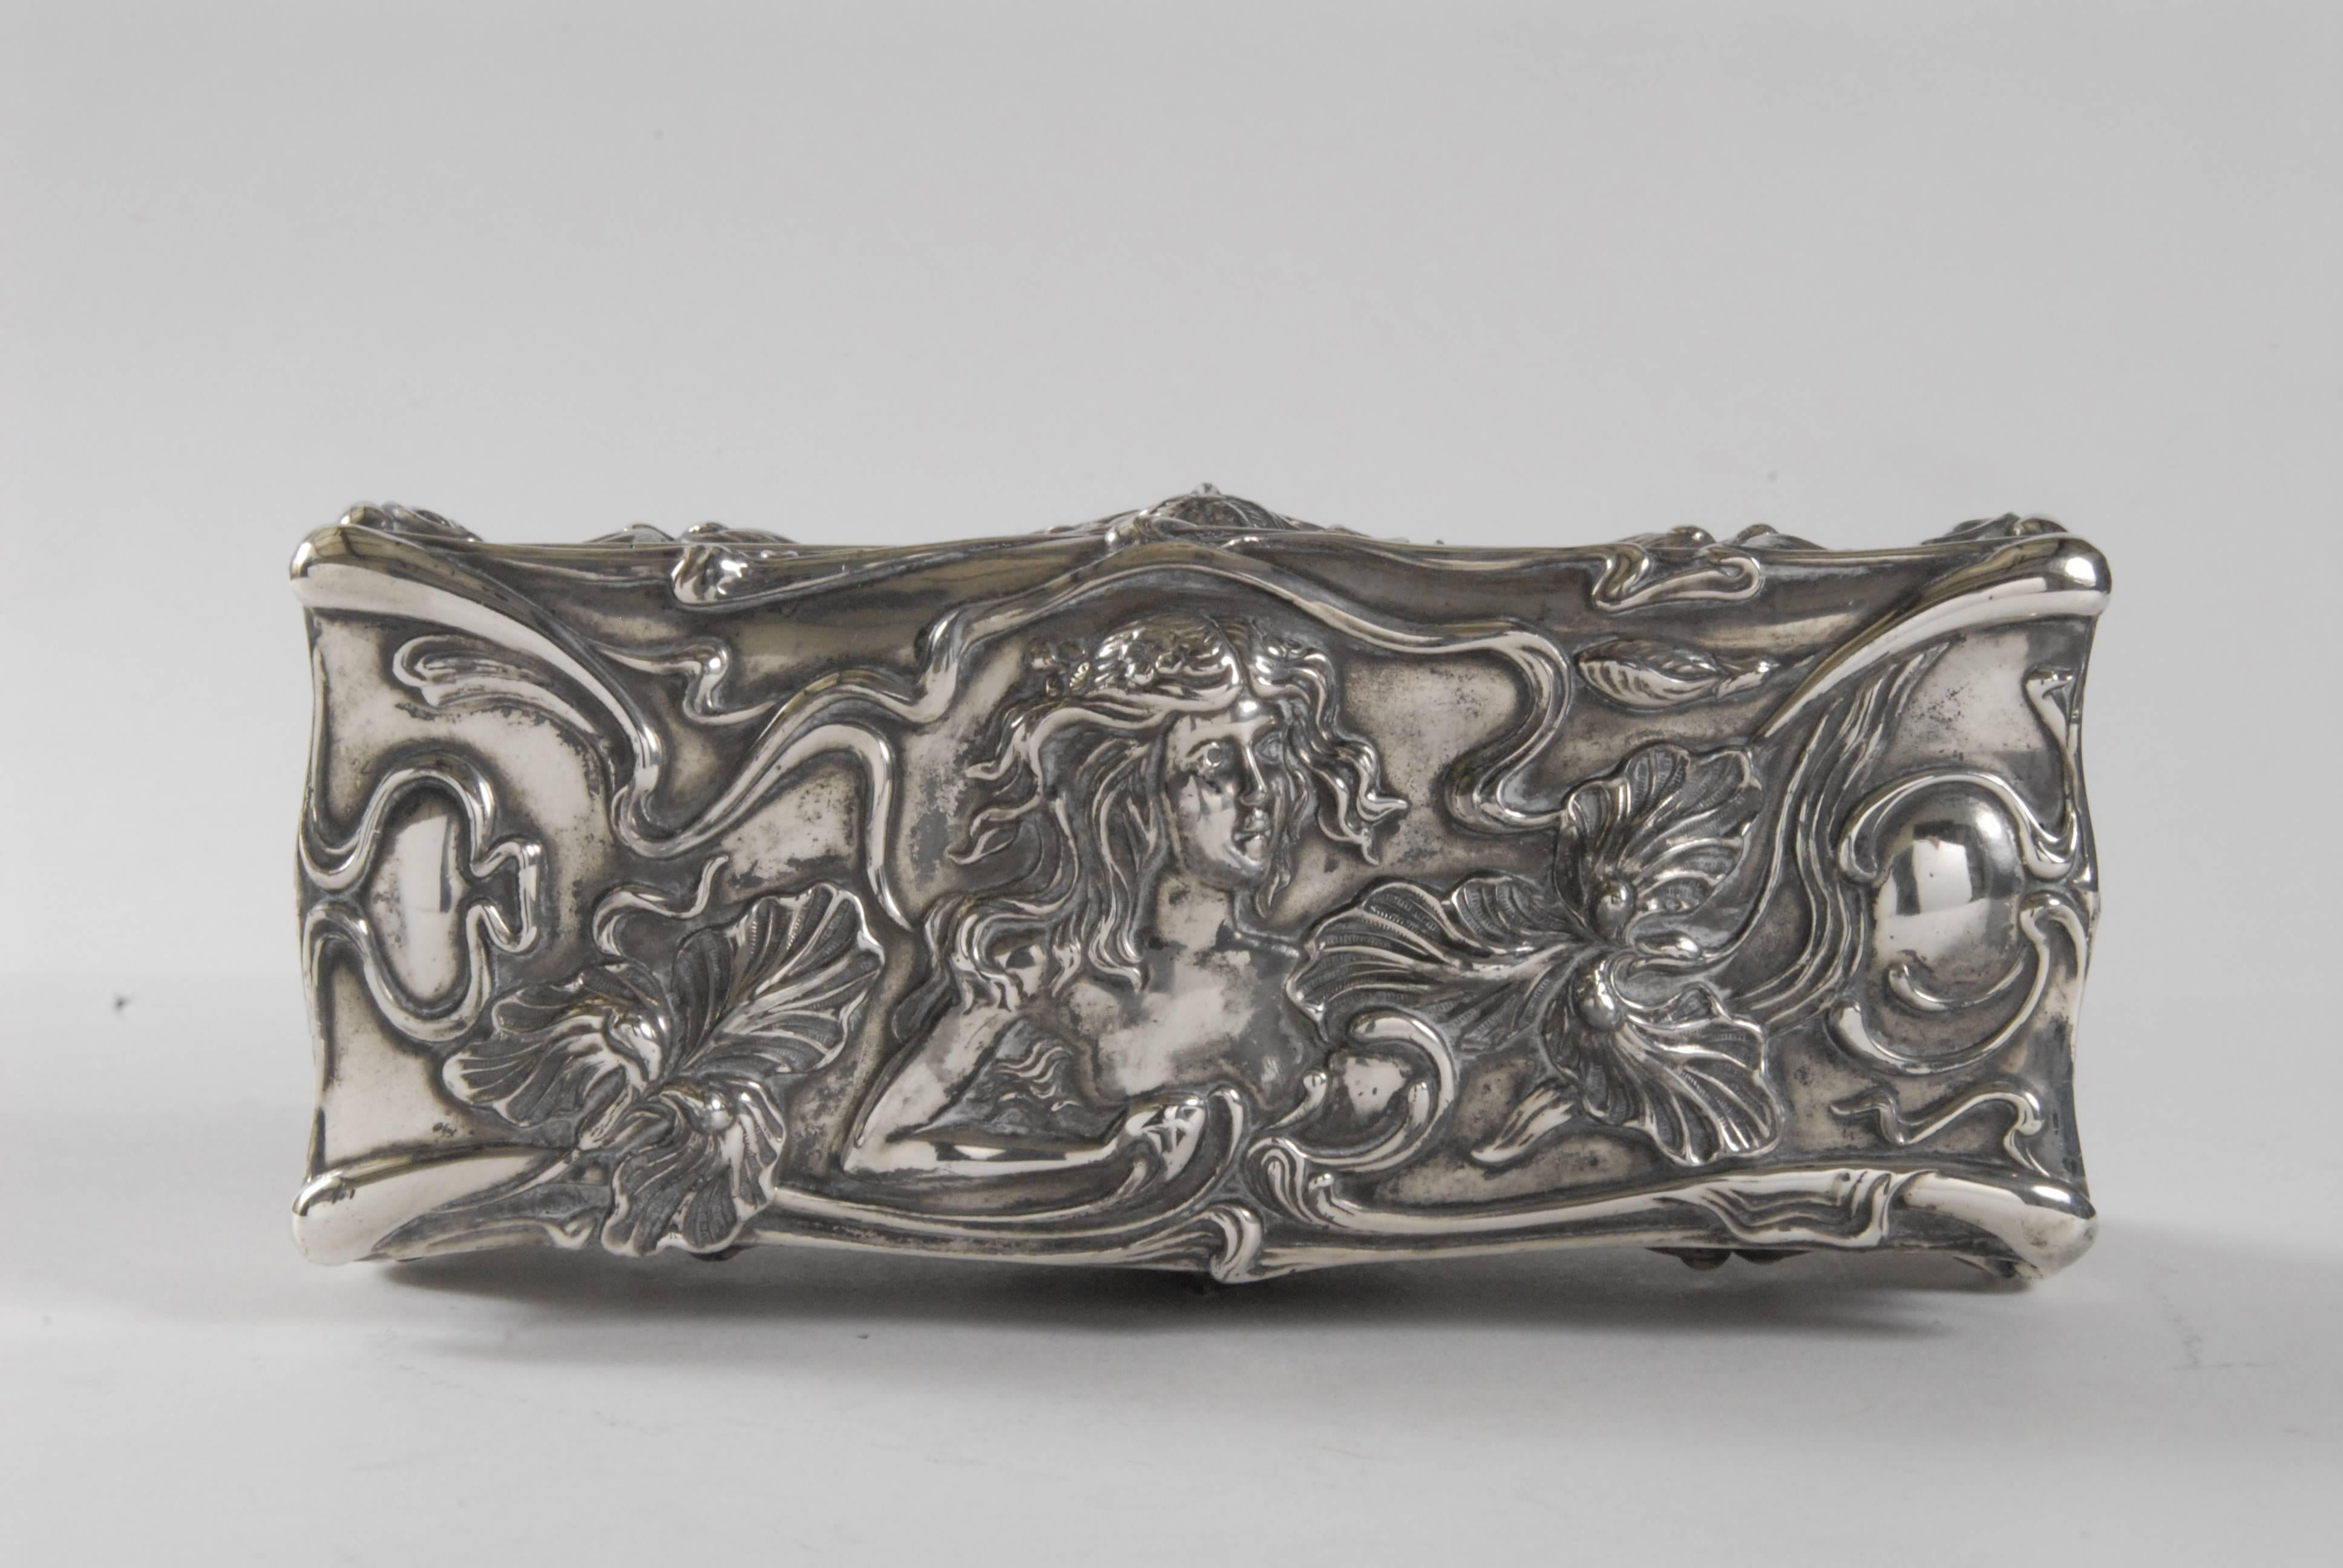 An impressive Jennings Brothers of Bridgeport Connecticut  silver plated jewellery casket heavily decorated with female heads, cartouches, and sweeping connecting tendrils, supported on heavily shaped cabriole legs, red velvet lined interior. Marked